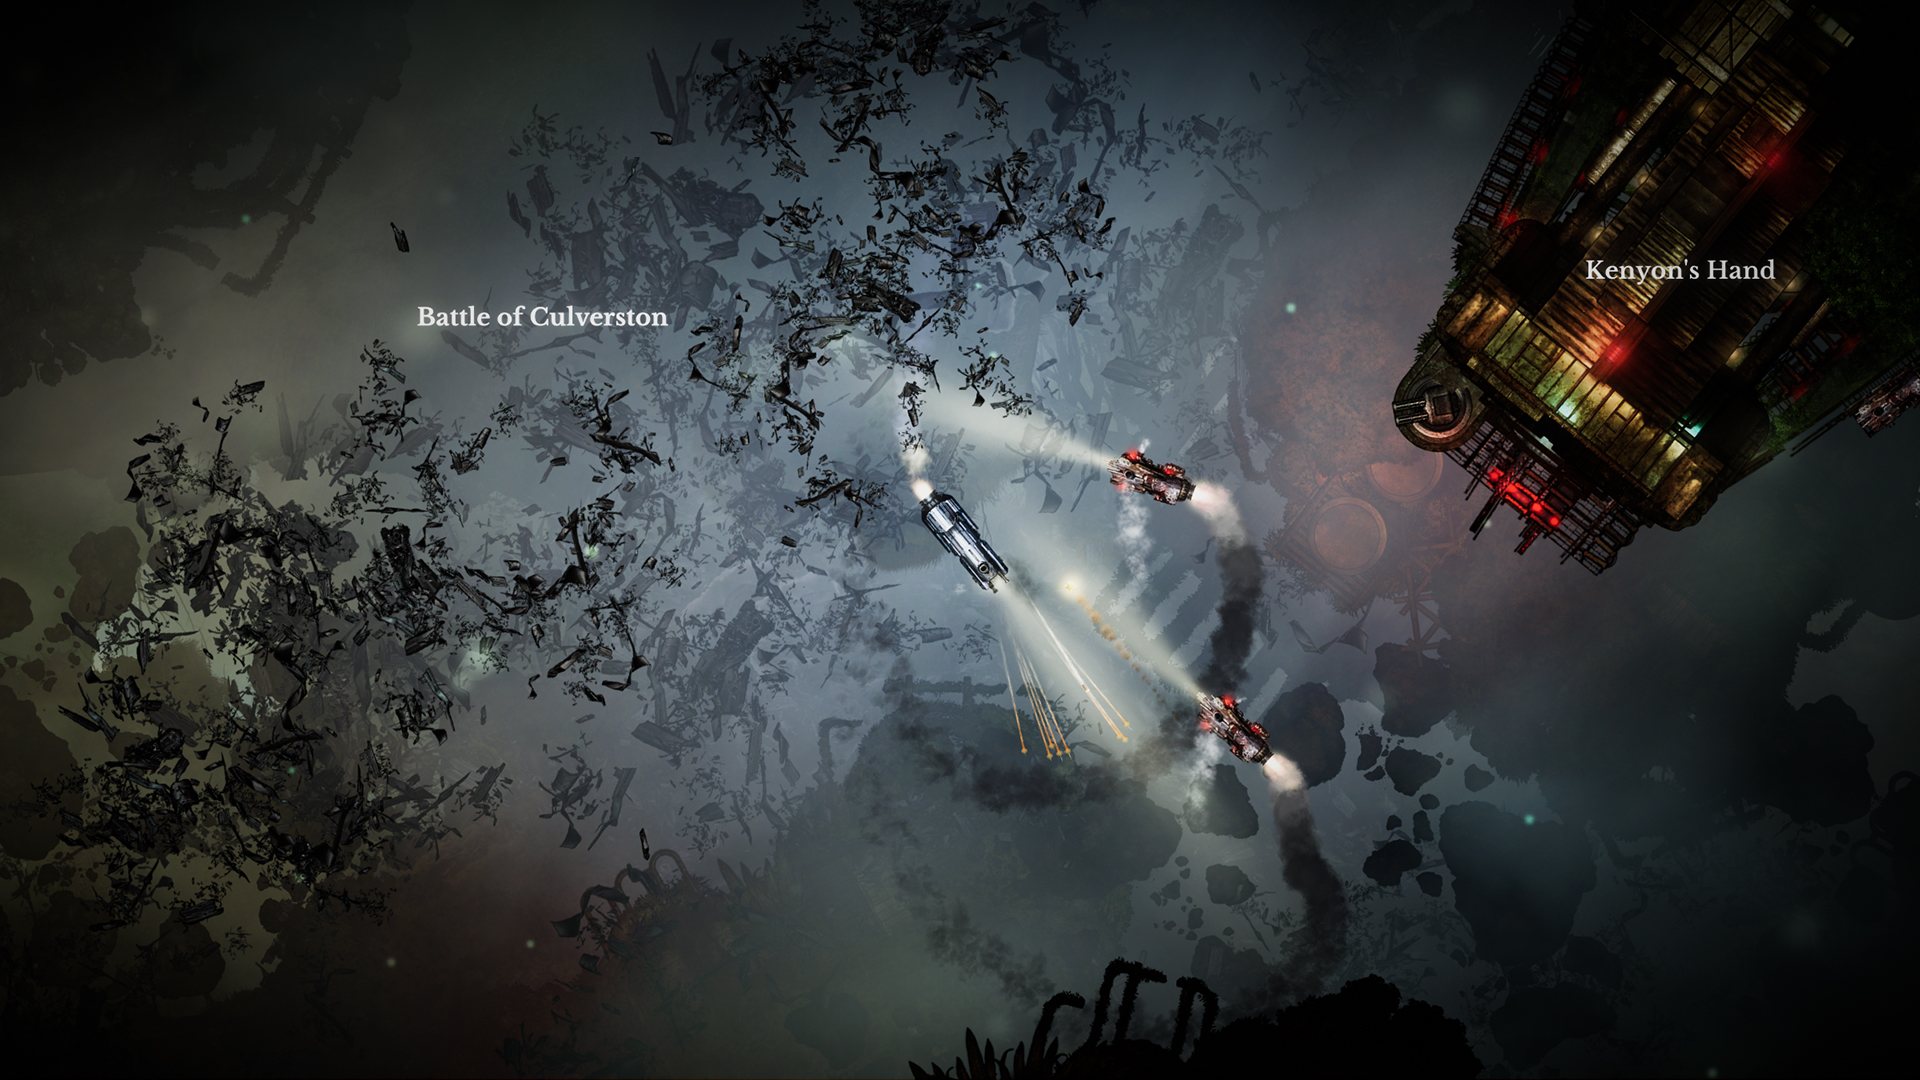 Sunless Skies Steam - Check Out Some of the Best Features